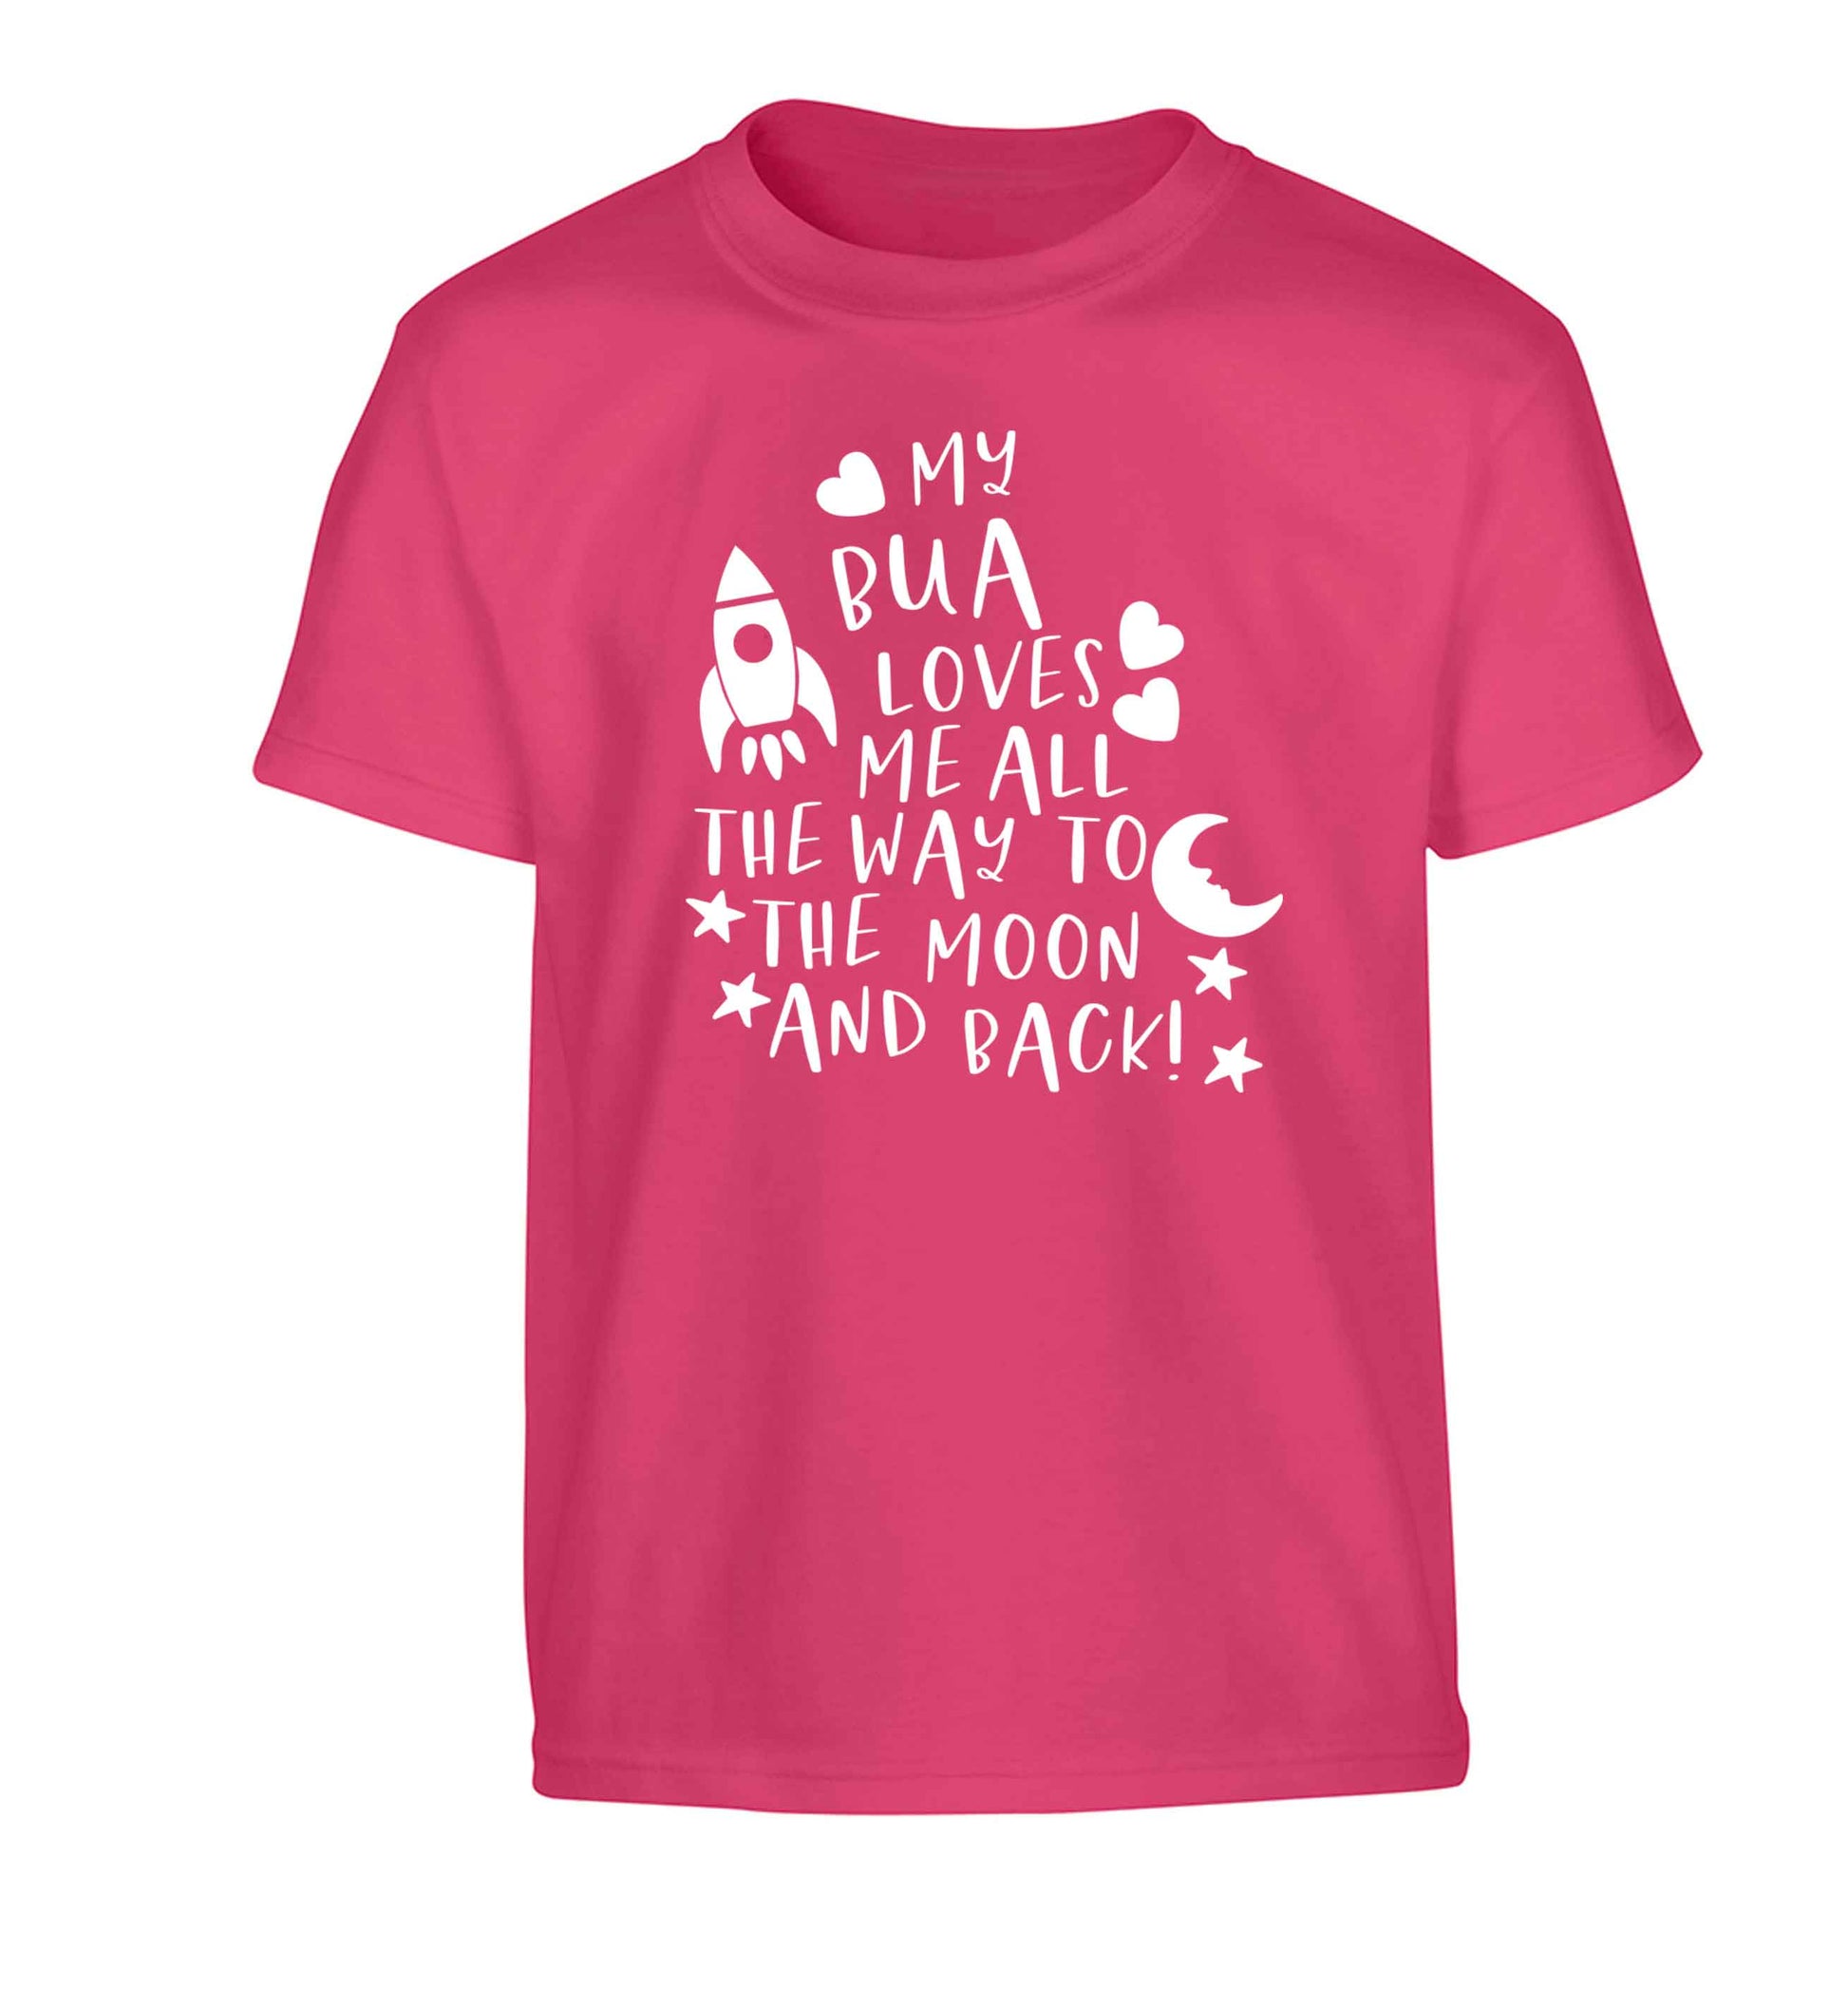 My bua loves me all they way to the moon and back Children's pink Tshirt 12-13 Years